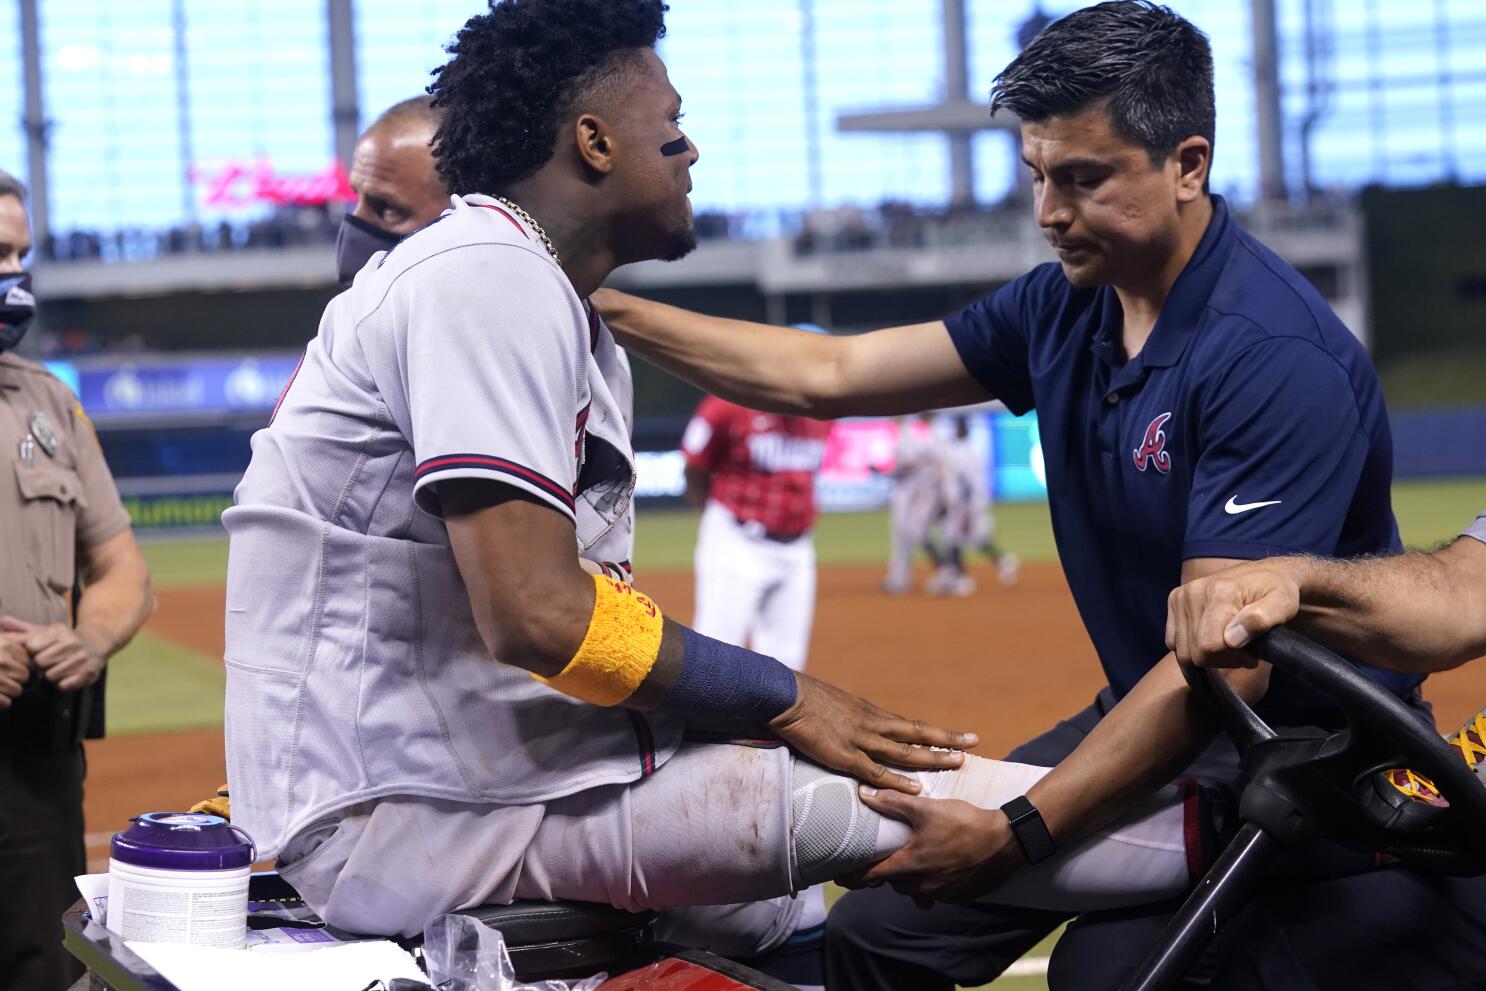 Braves News: Ronald Acuna Jr. removed during the 8th inning in Miami